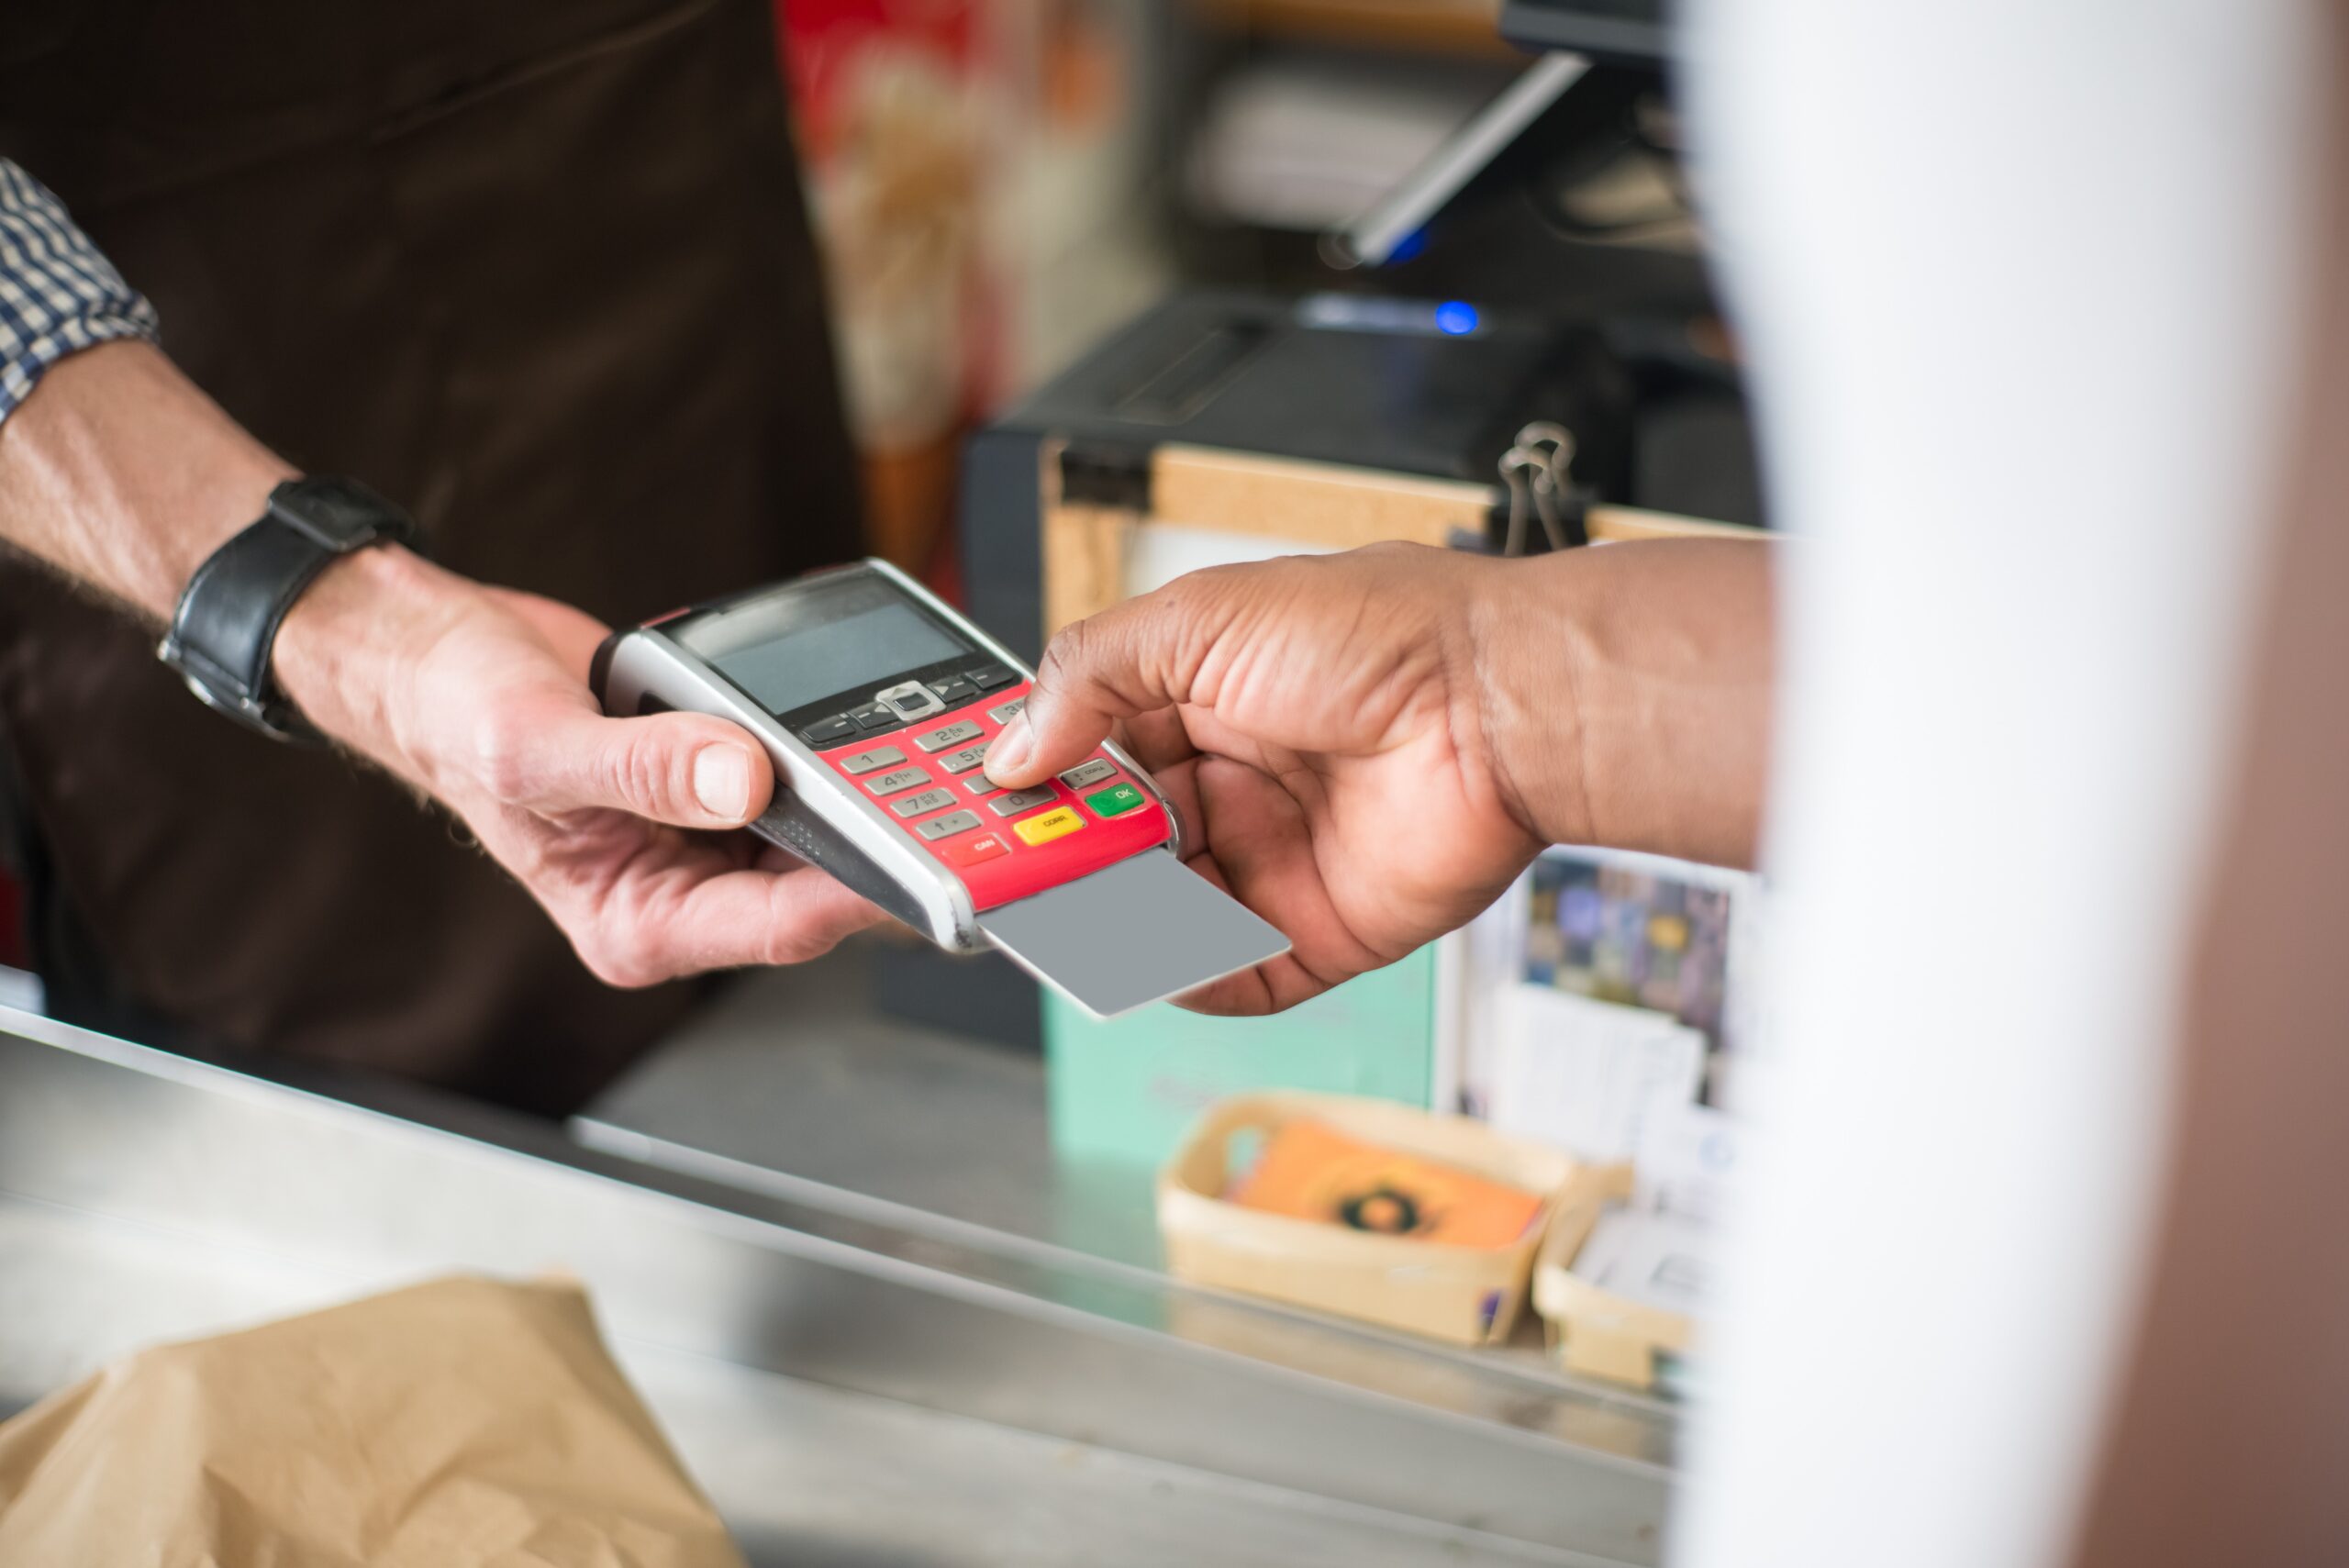 Retail sale using credit card reader at a store